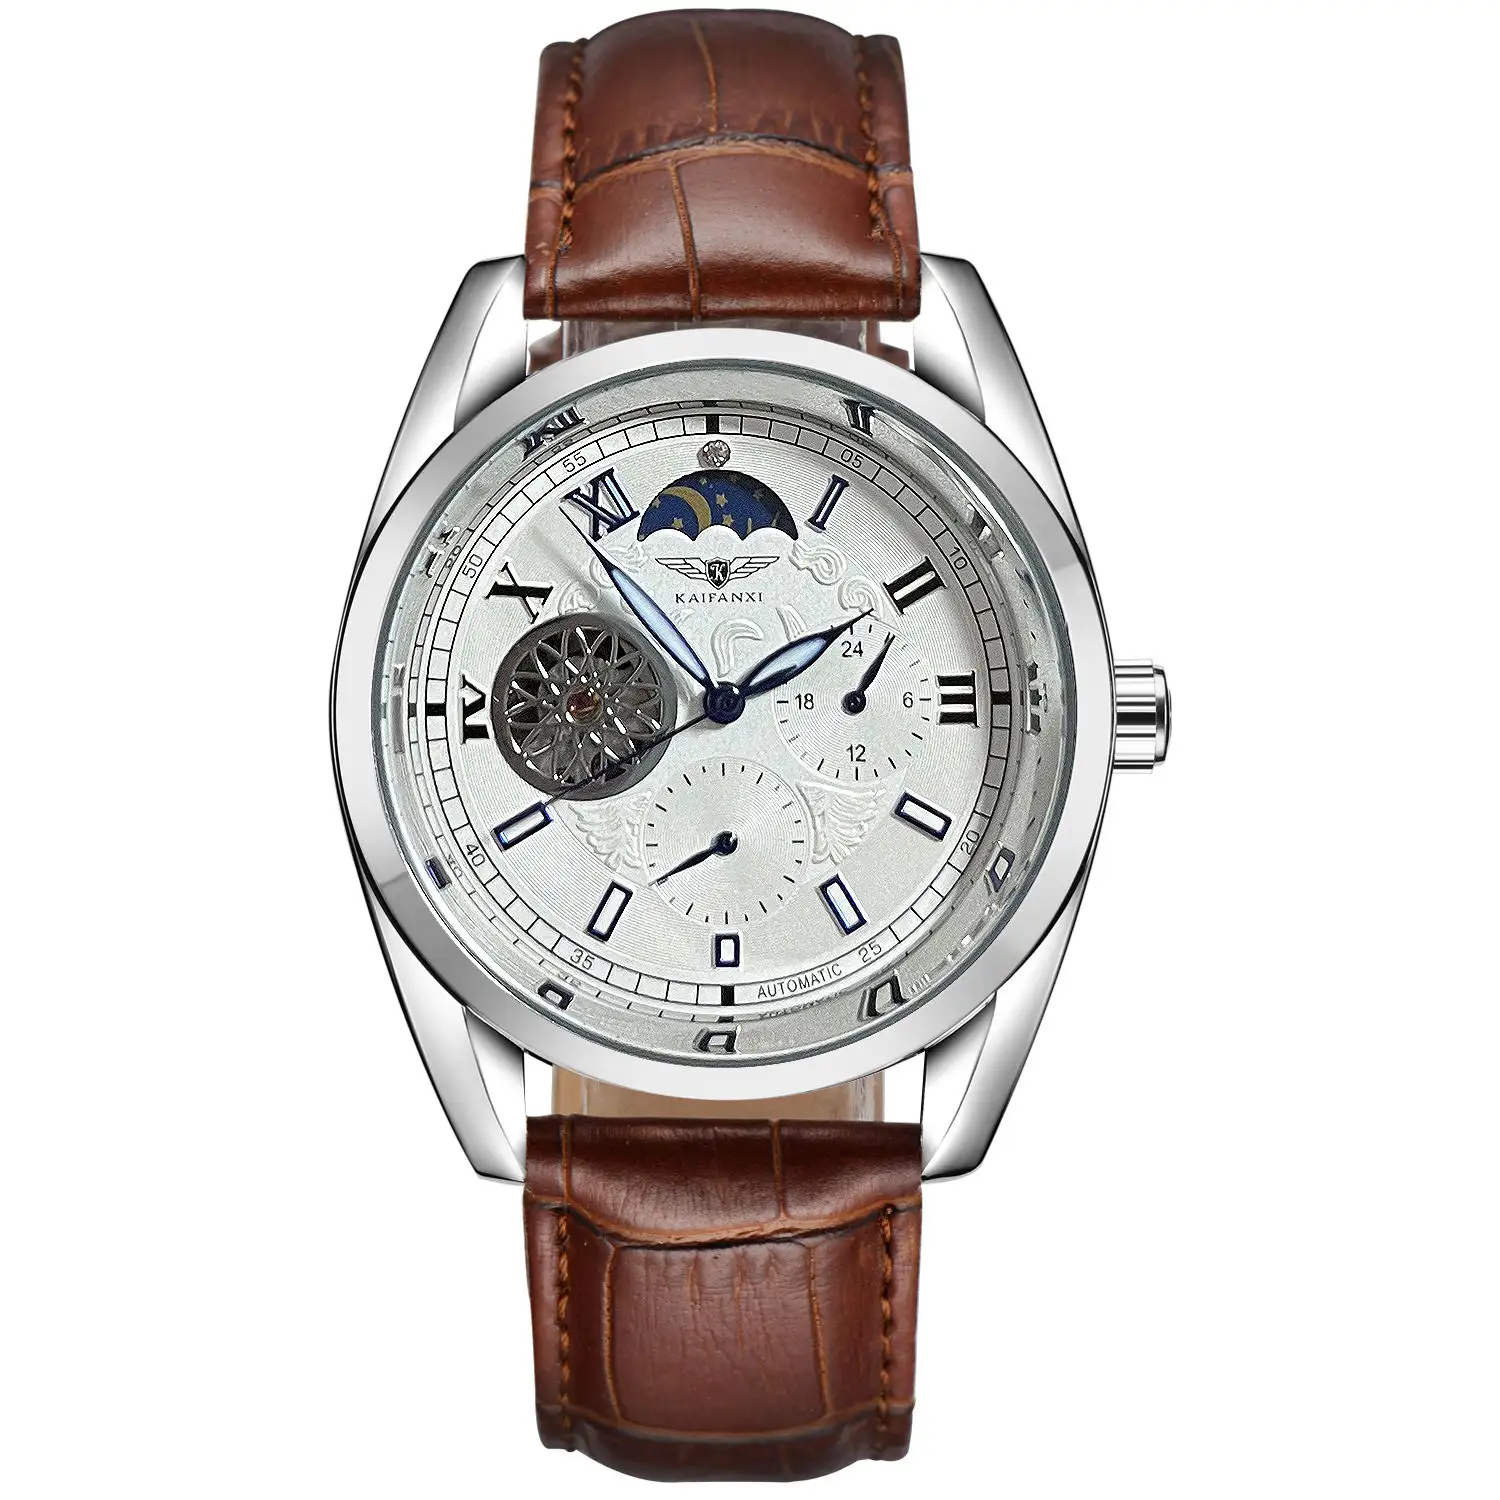 Tevise relogio masculino cheap men automatic mechanical watches genuine leather strap watch low price jam tangan pria